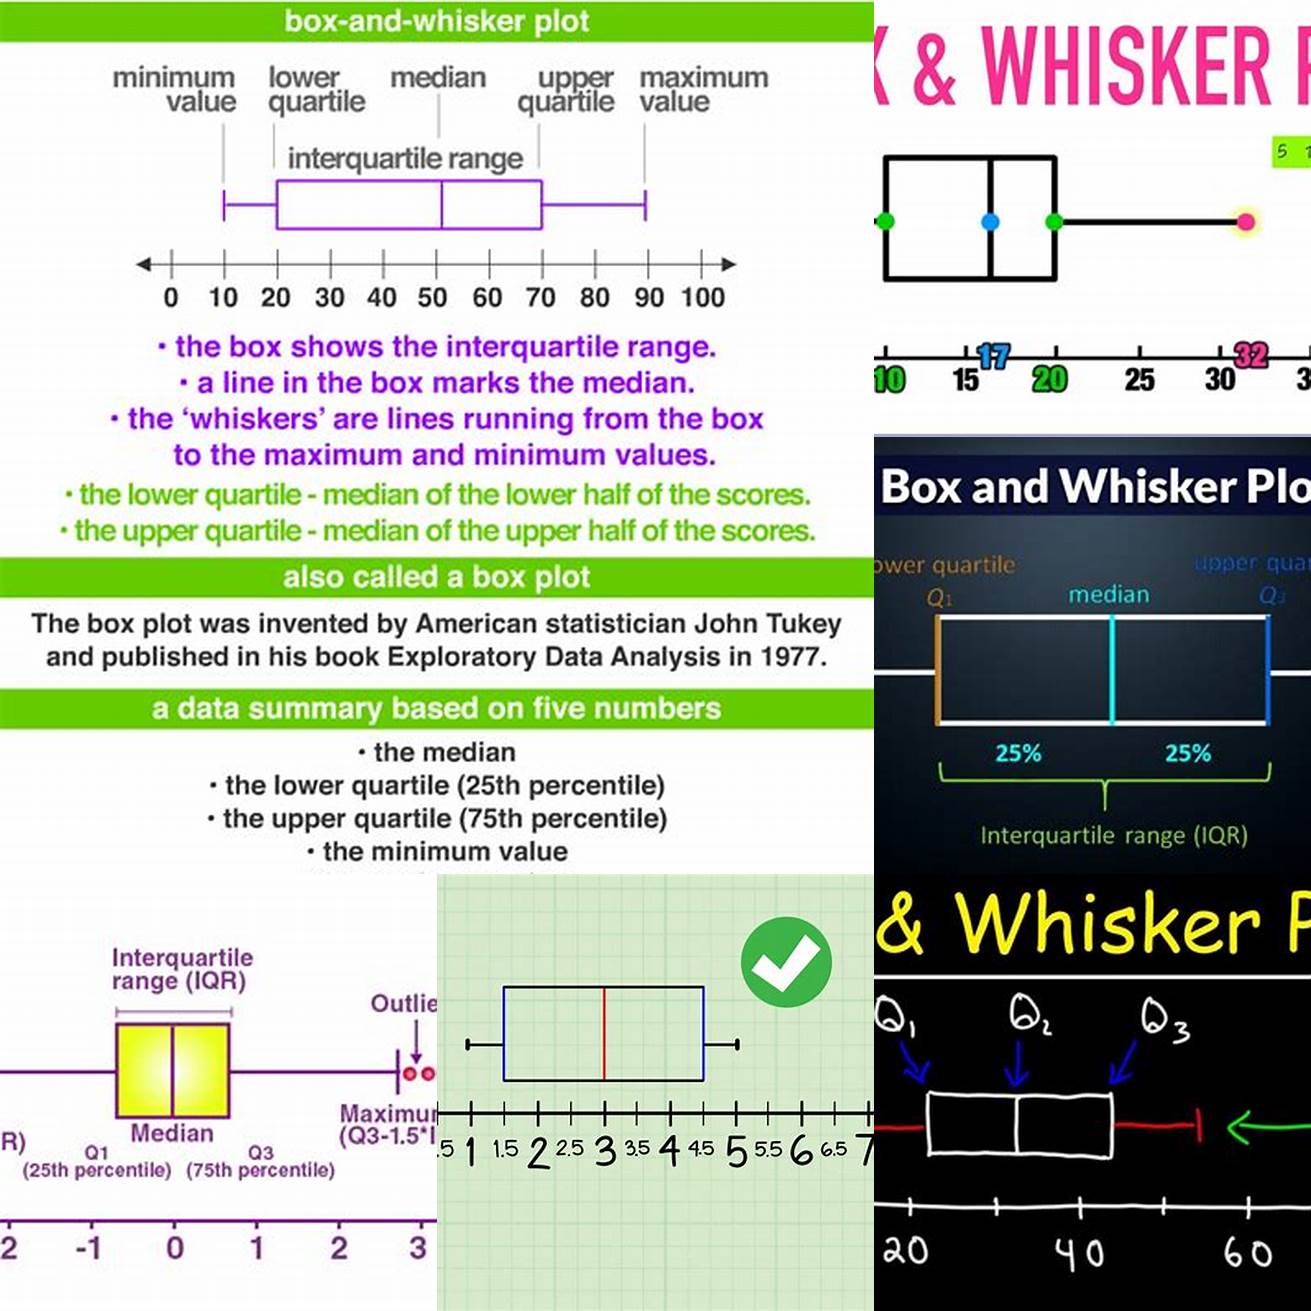 Draw the box and whisker plot using the median lower quartile upper quartile and whiskers